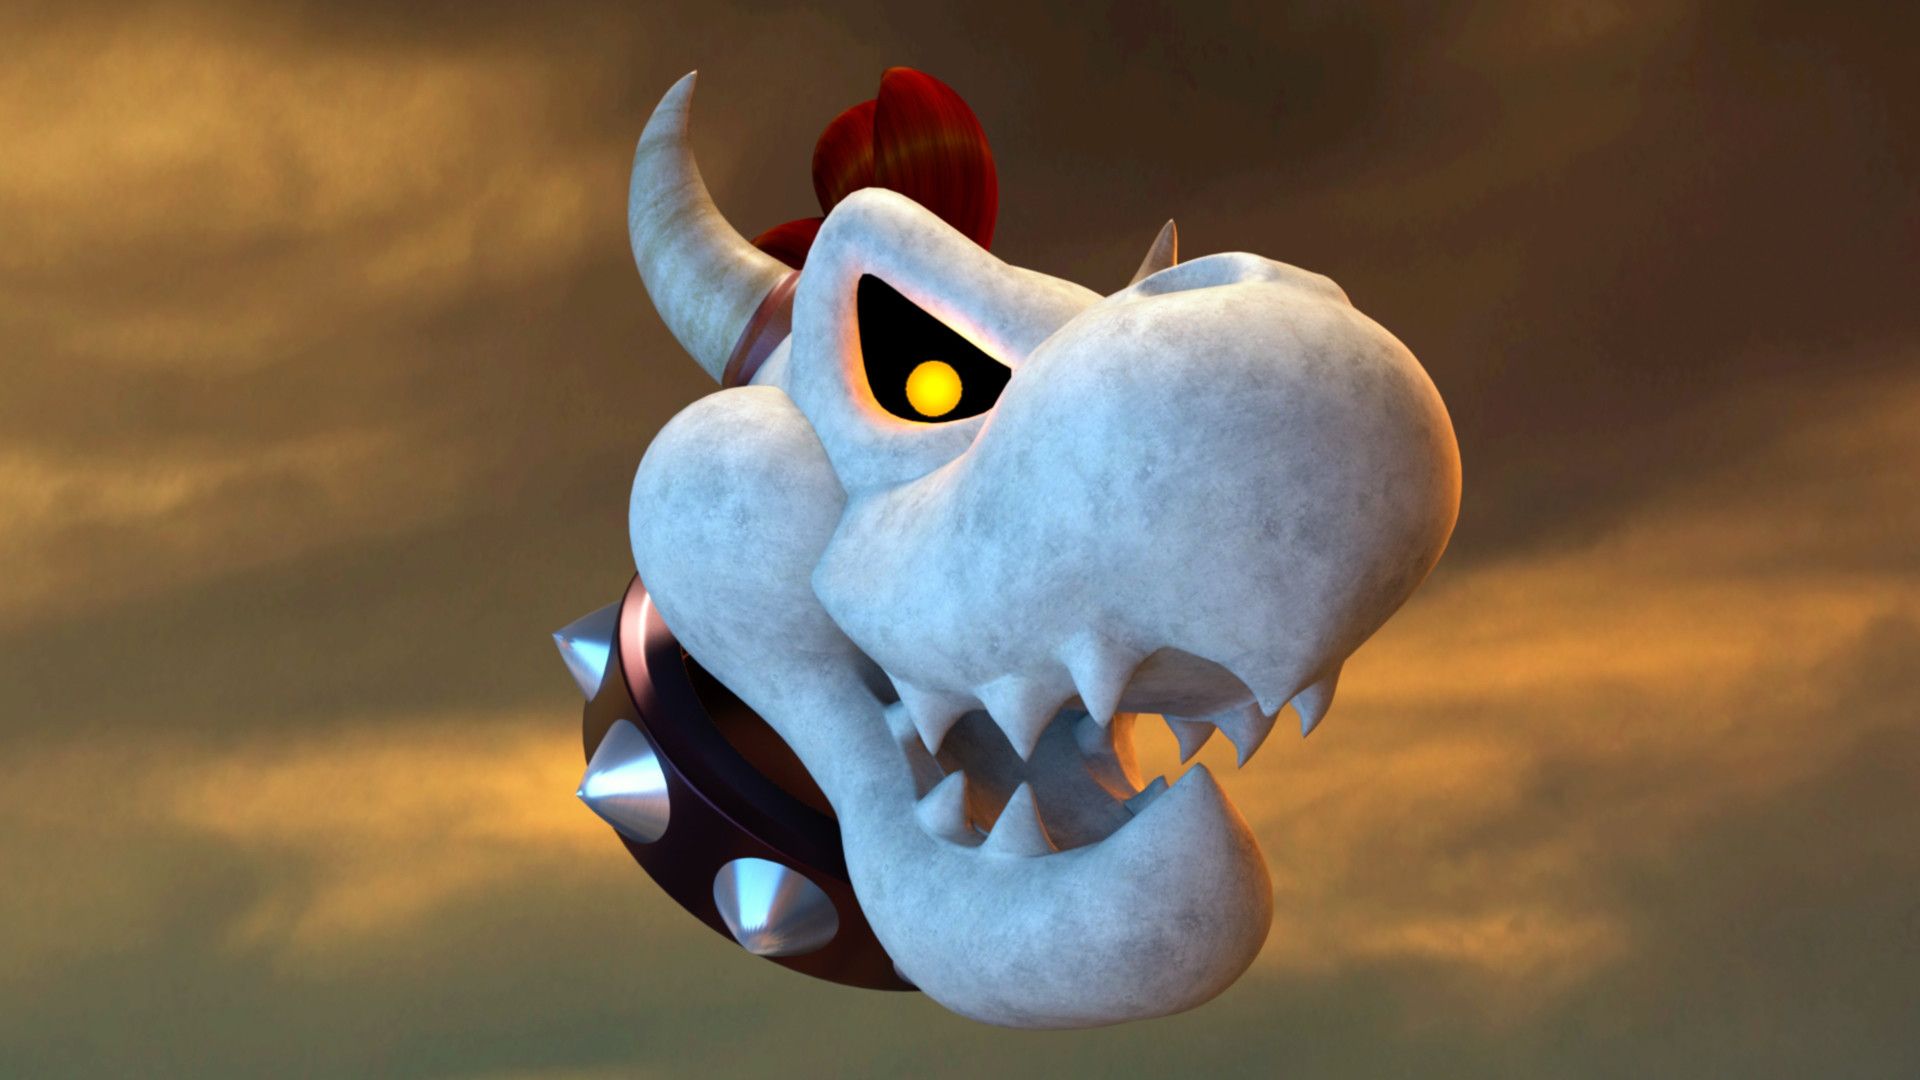 Dry Bowser's head from the Super Mario series, Lucas